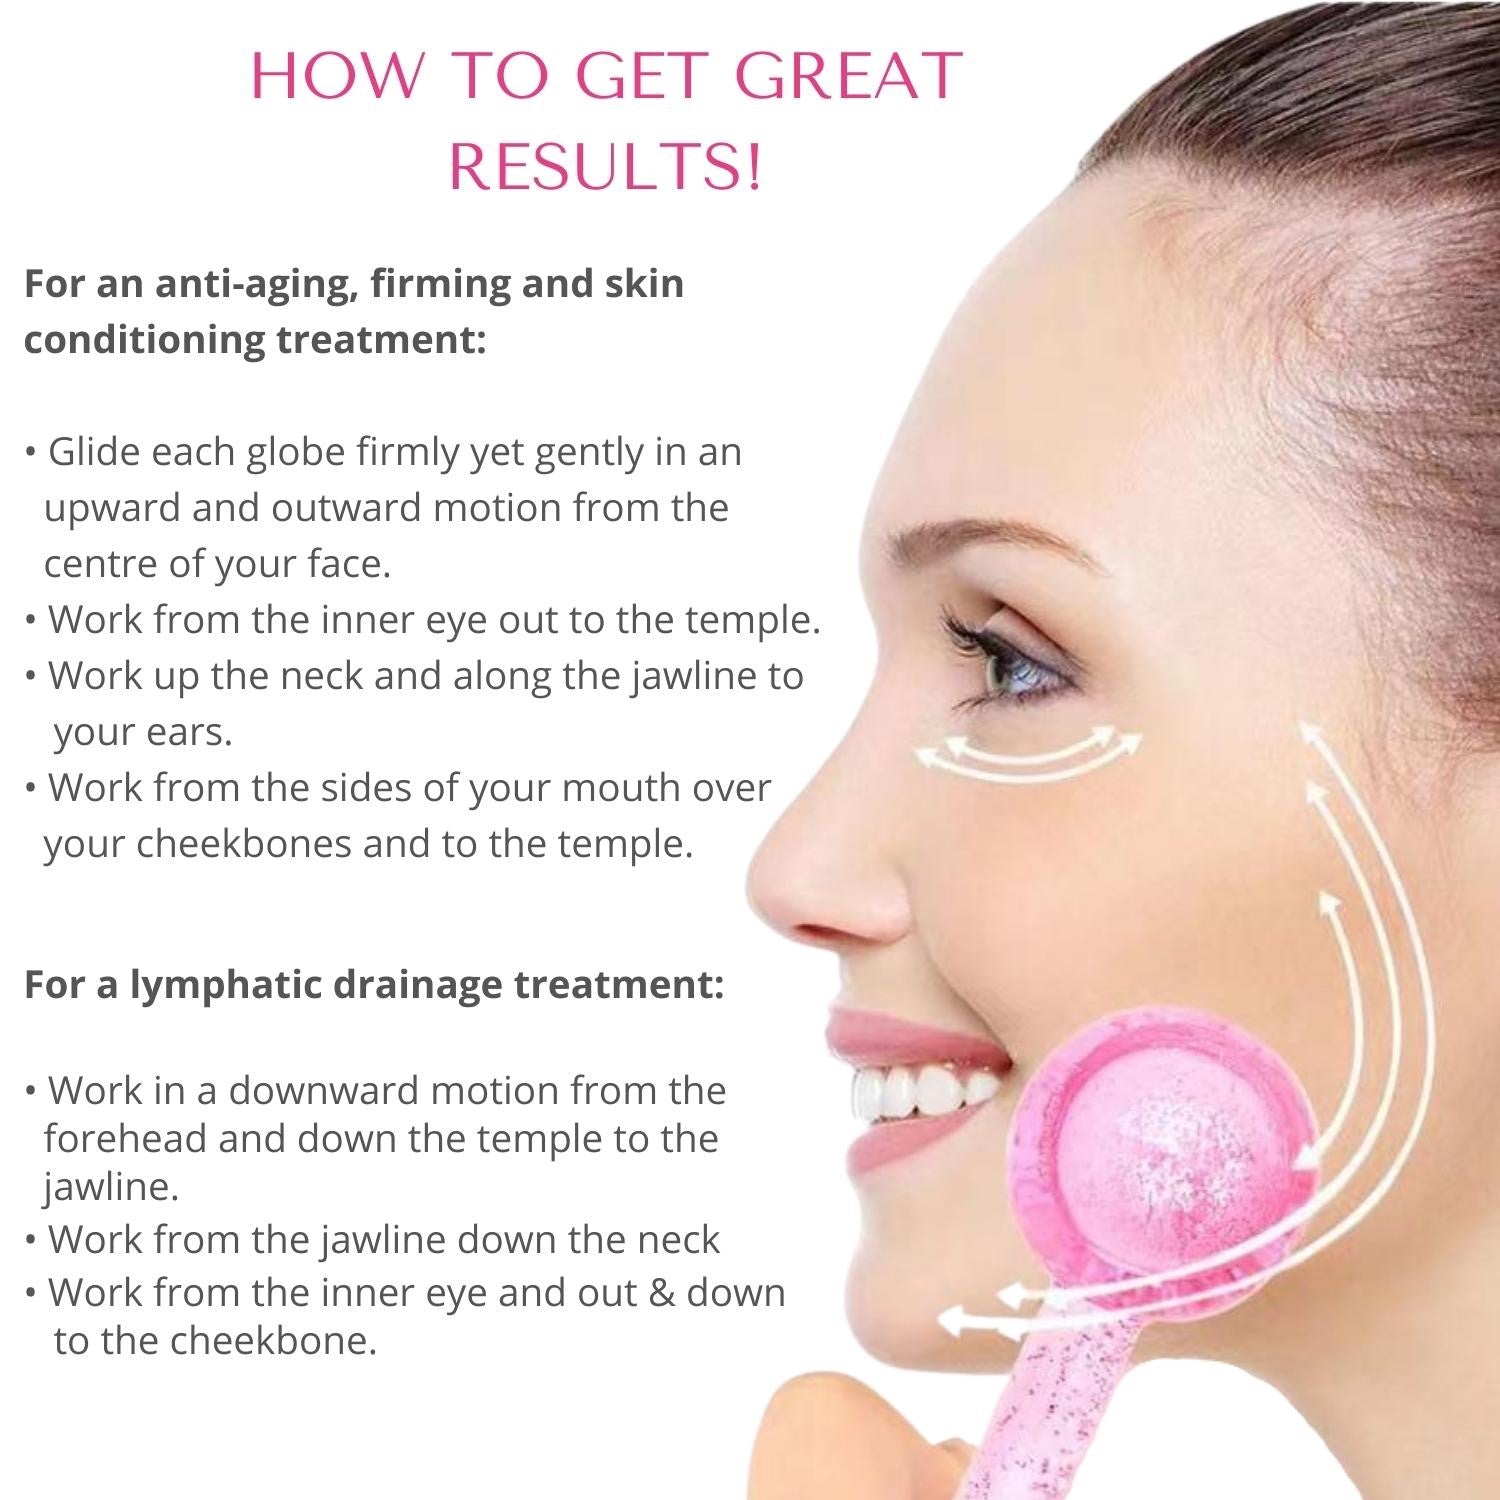 How to use your Dermaworks ice face roller for anti aging, firming and skin conditioning. How to use for lymphatic drainage.